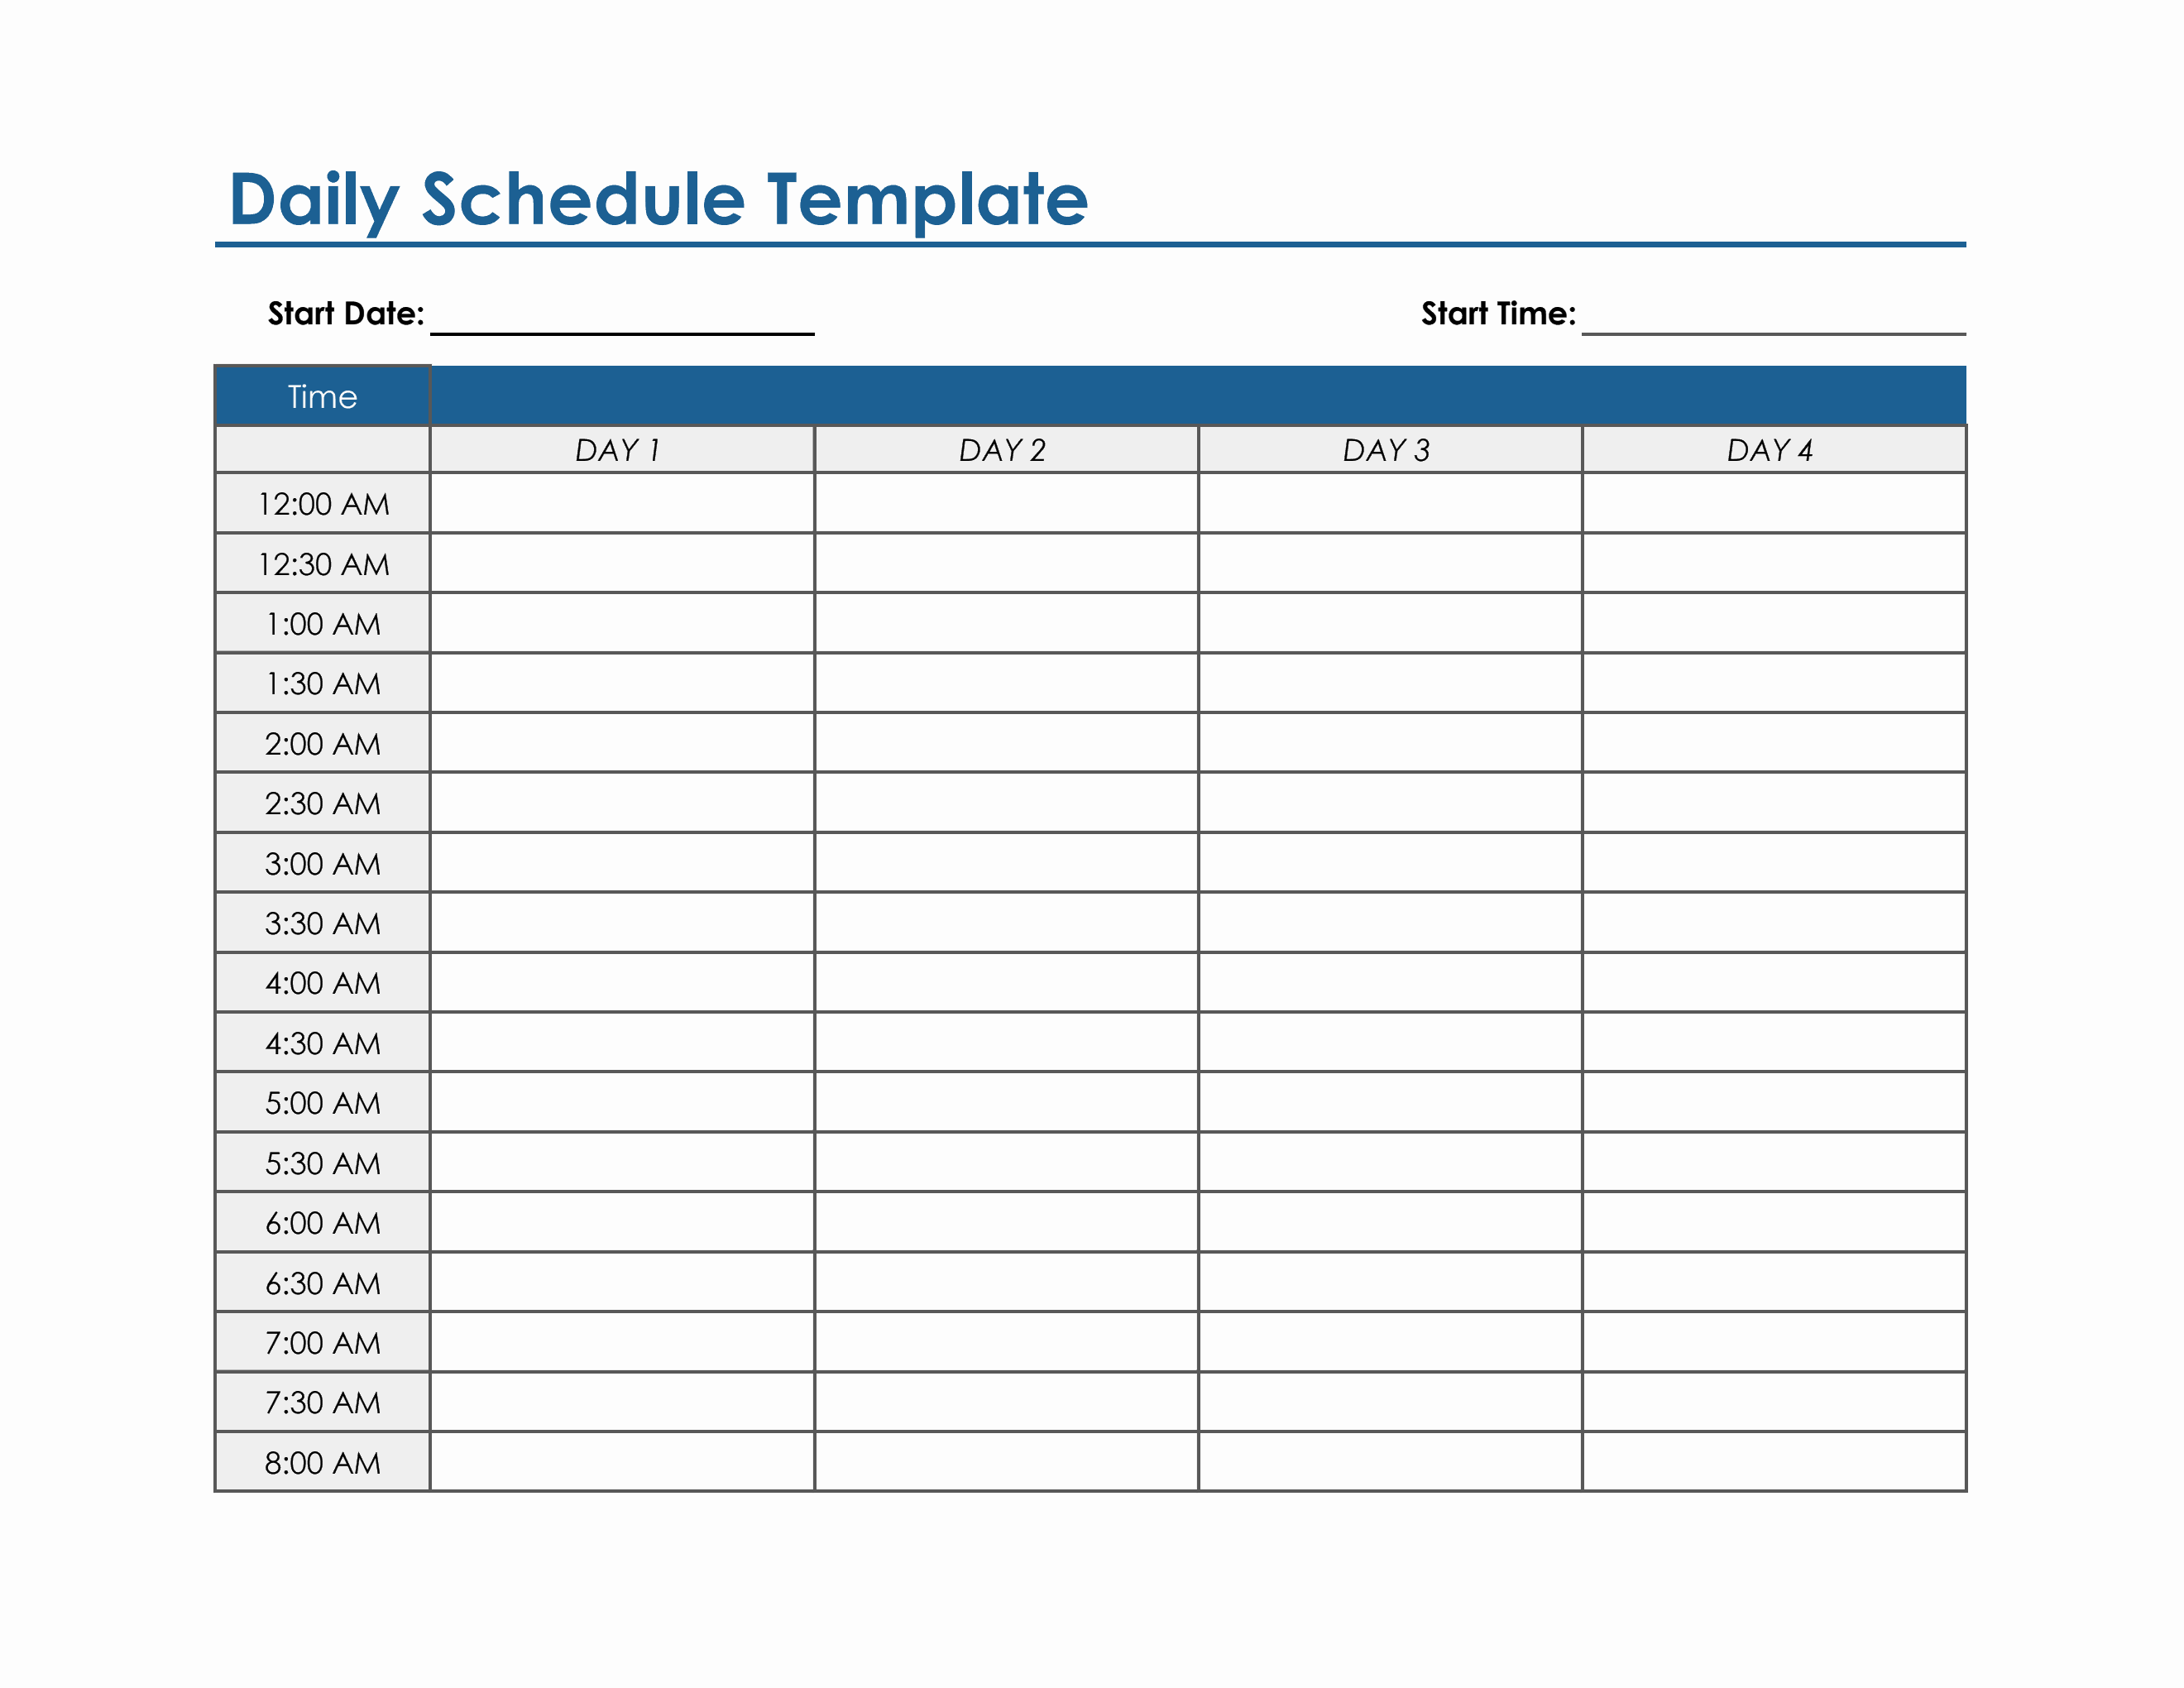 daily-schedule-template-excel-letter-example-template-gambaran